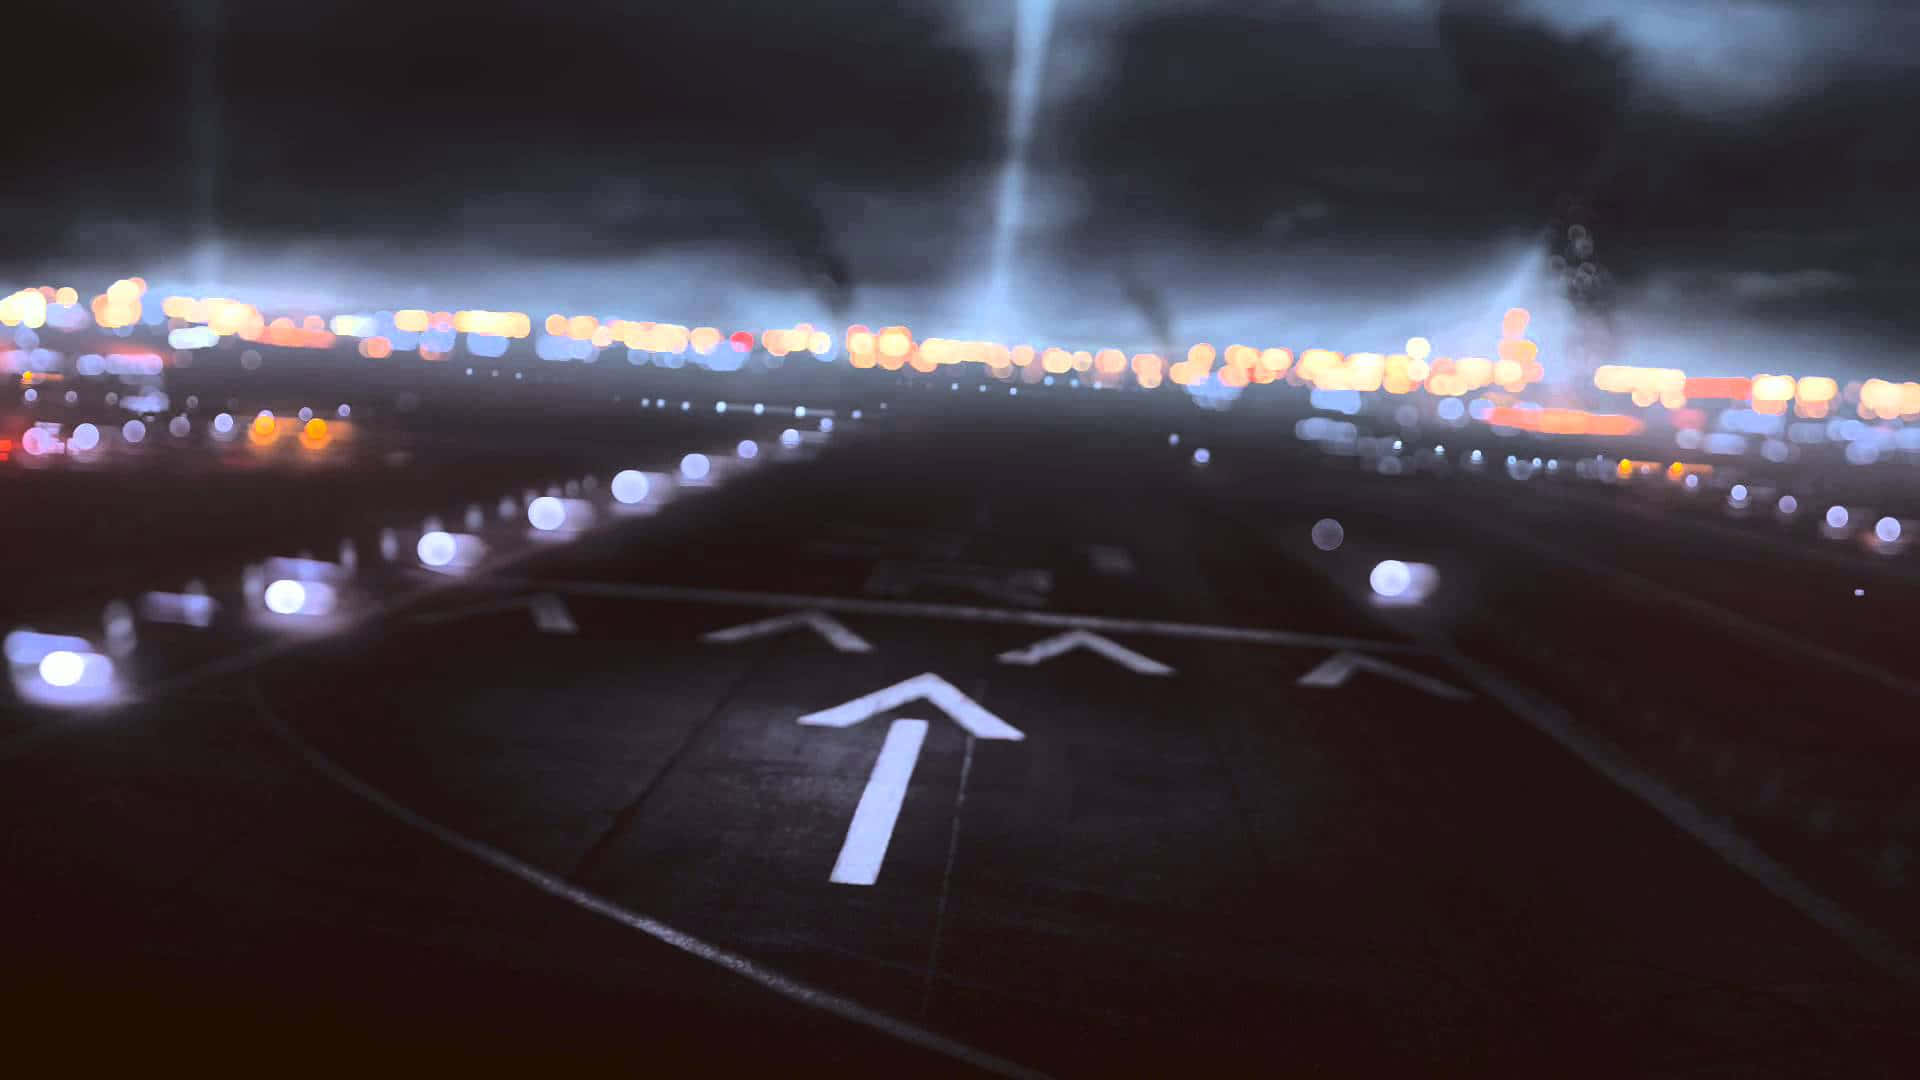 A Dark Night Scene With A Runway And Lights